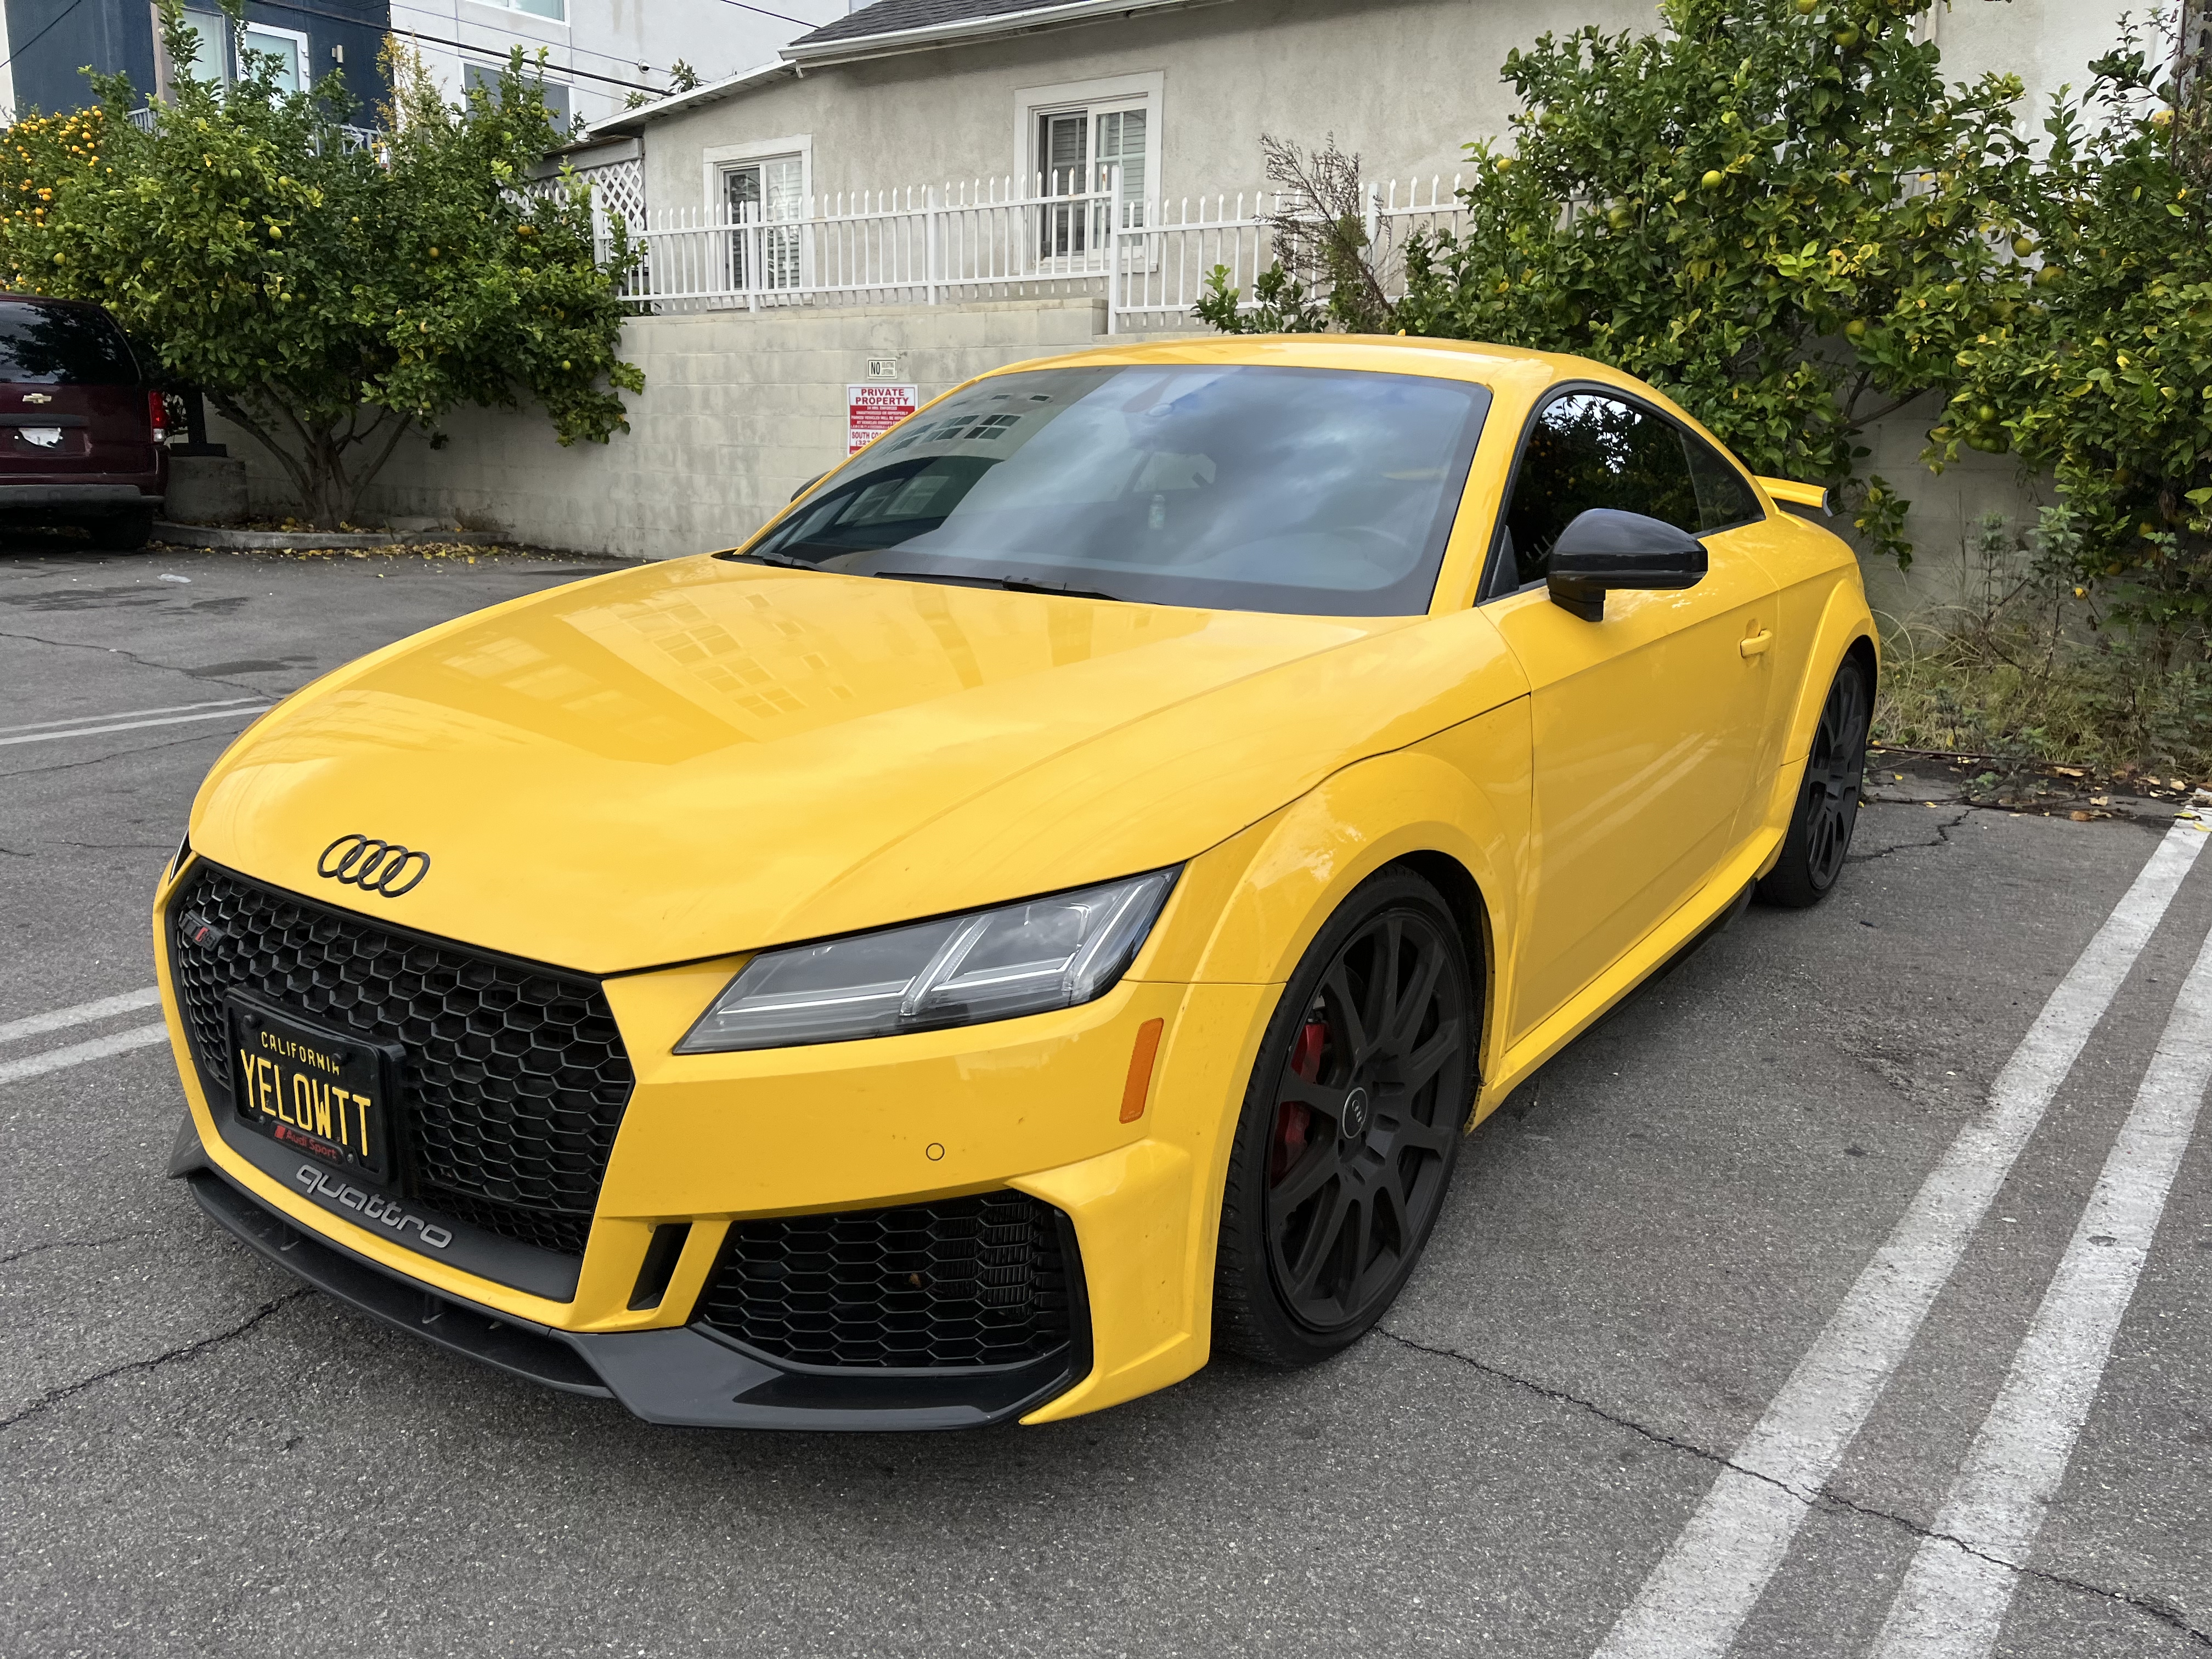 2019 AUDI TT RS - SPORT EDITION for sale by auction in Manchester